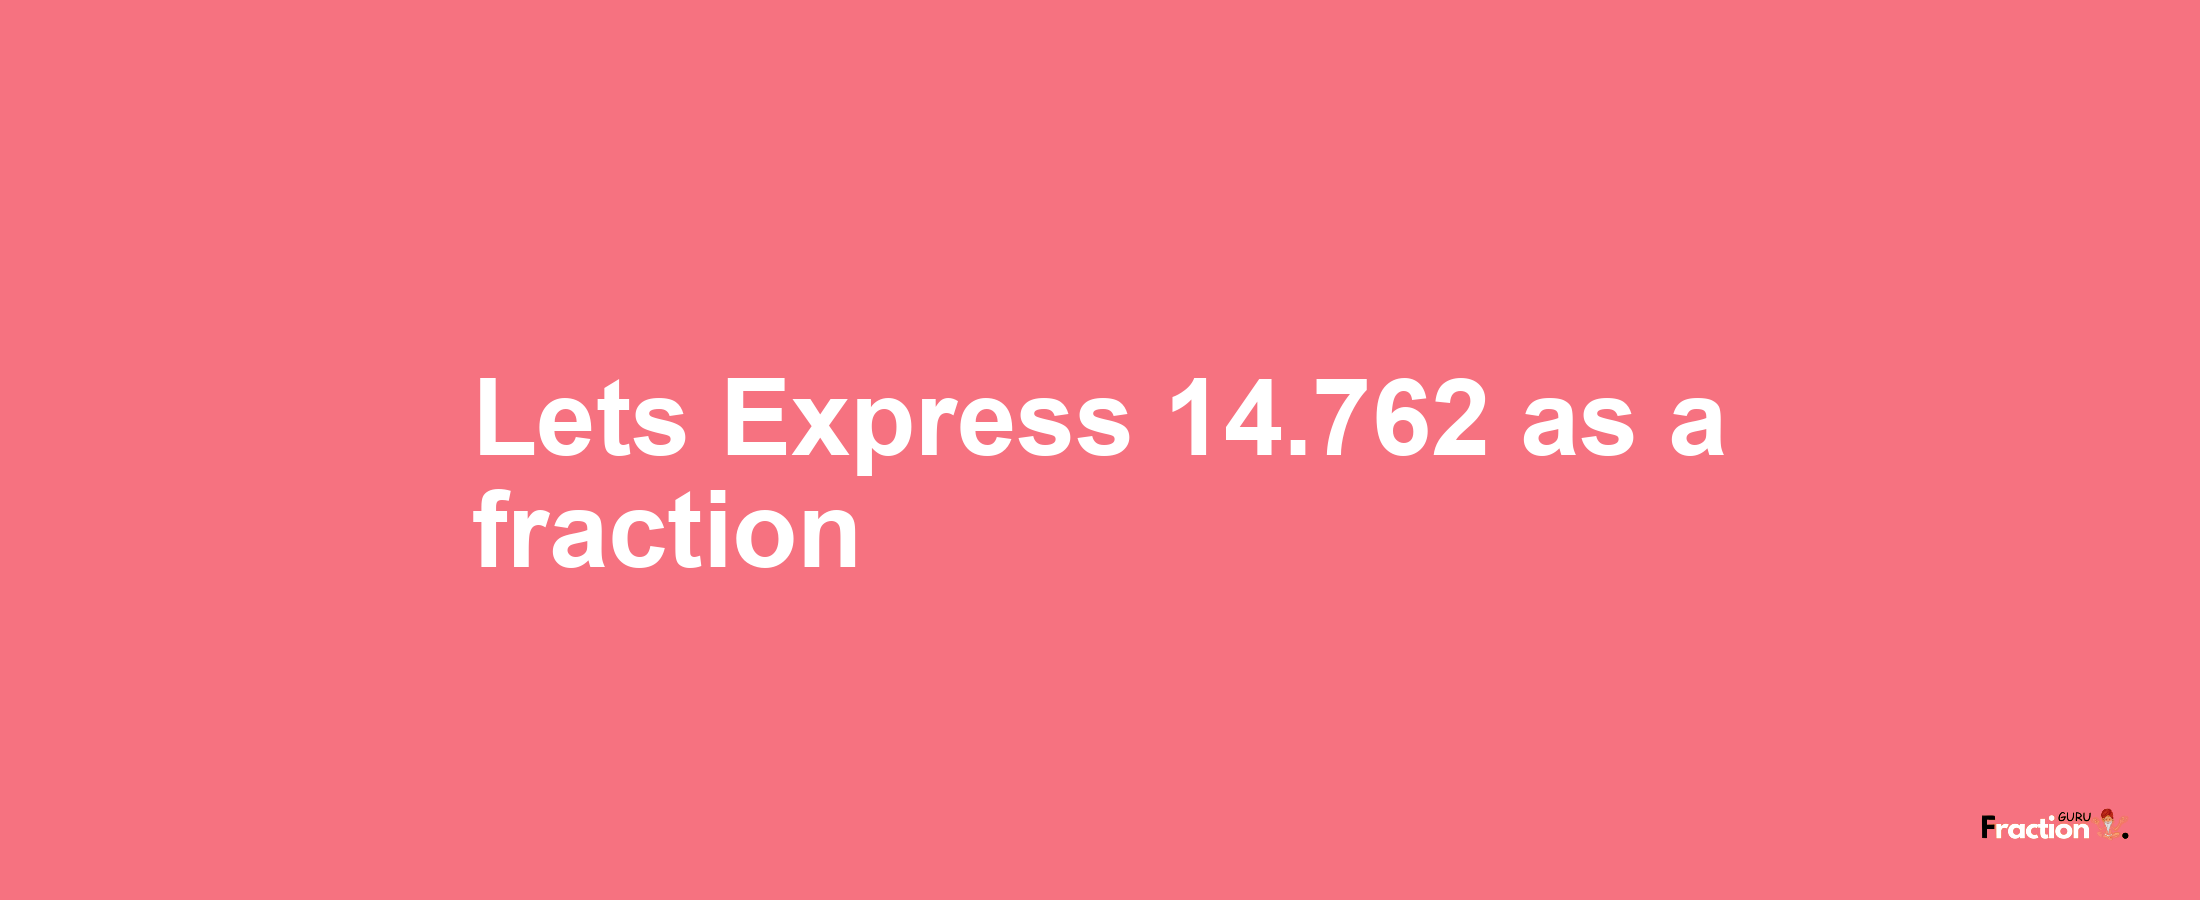 Lets Express 14.762 as afraction